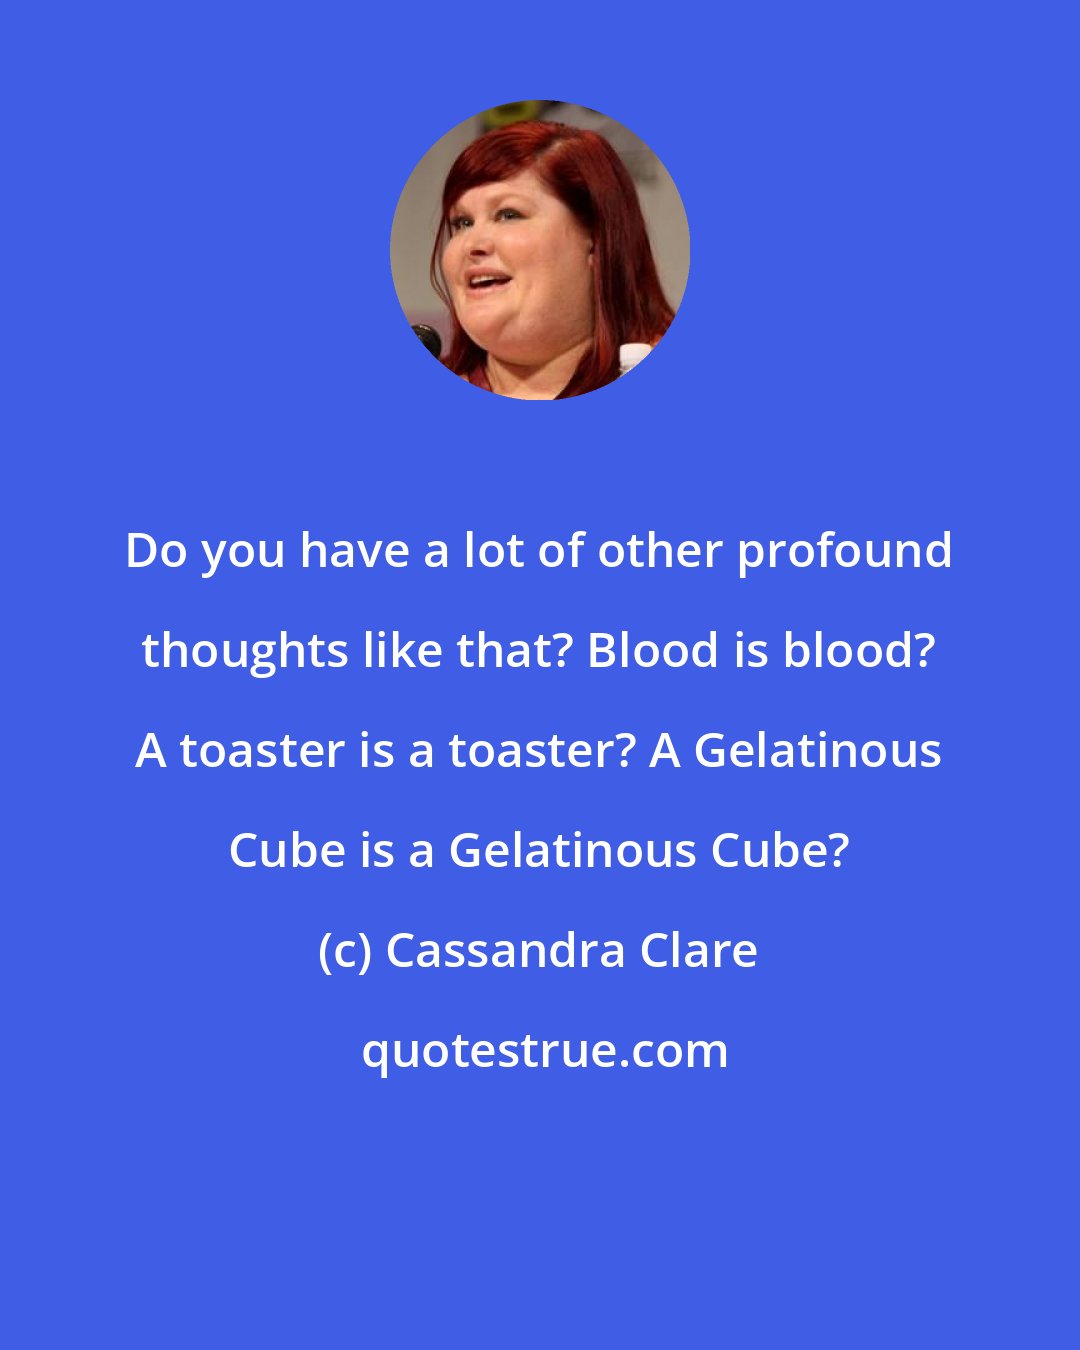 Cassandra Clare: Do you have a lot of other profound thoughts like that? Blood is blood? A toaster is a toaster? A Gelatinous Cube is a Gelatinous Cube?